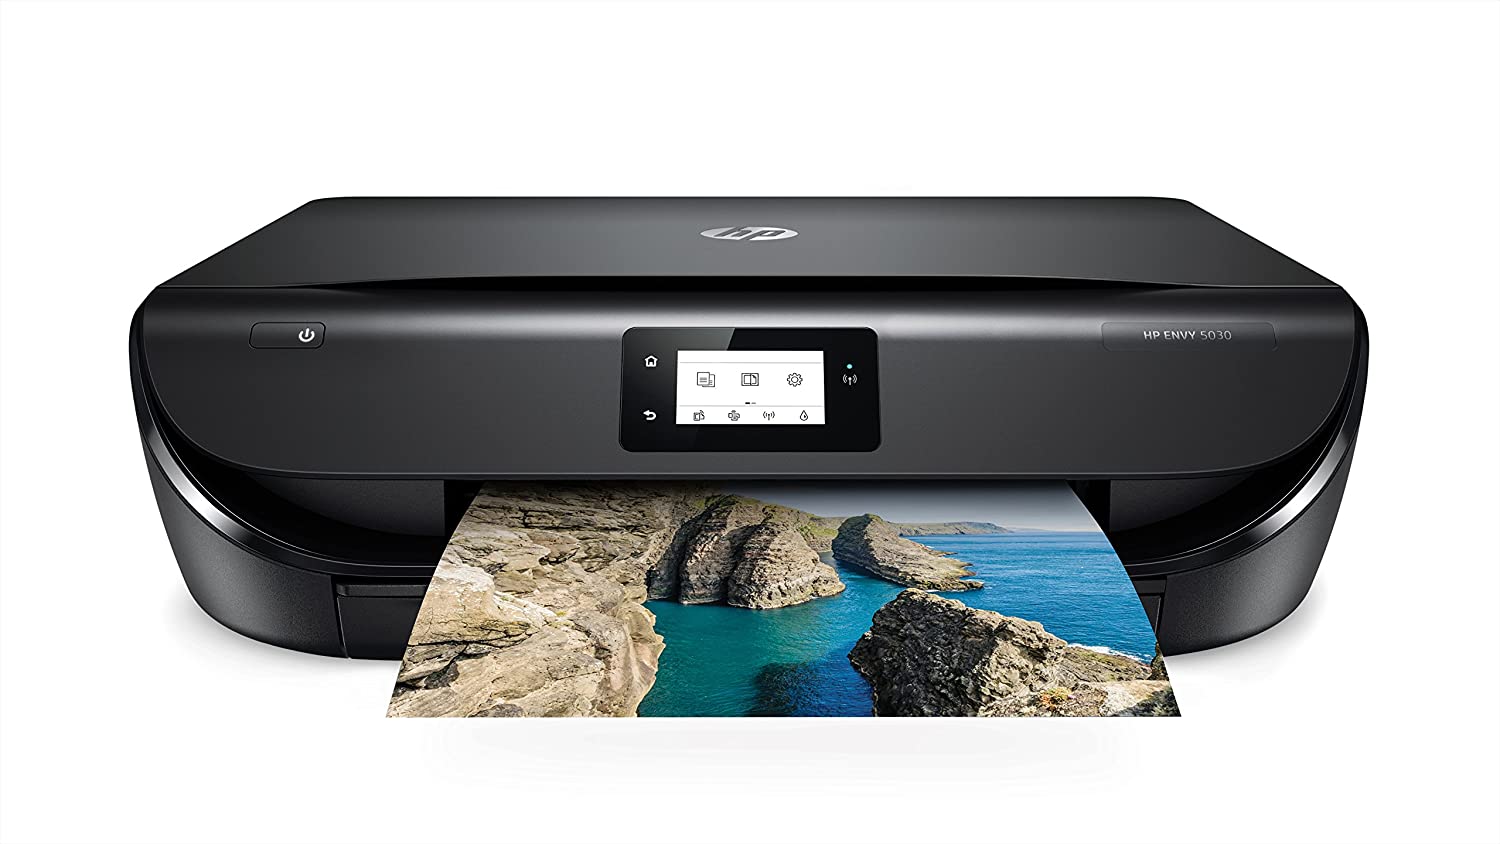 HP Envy 5030 All-in-One Printer